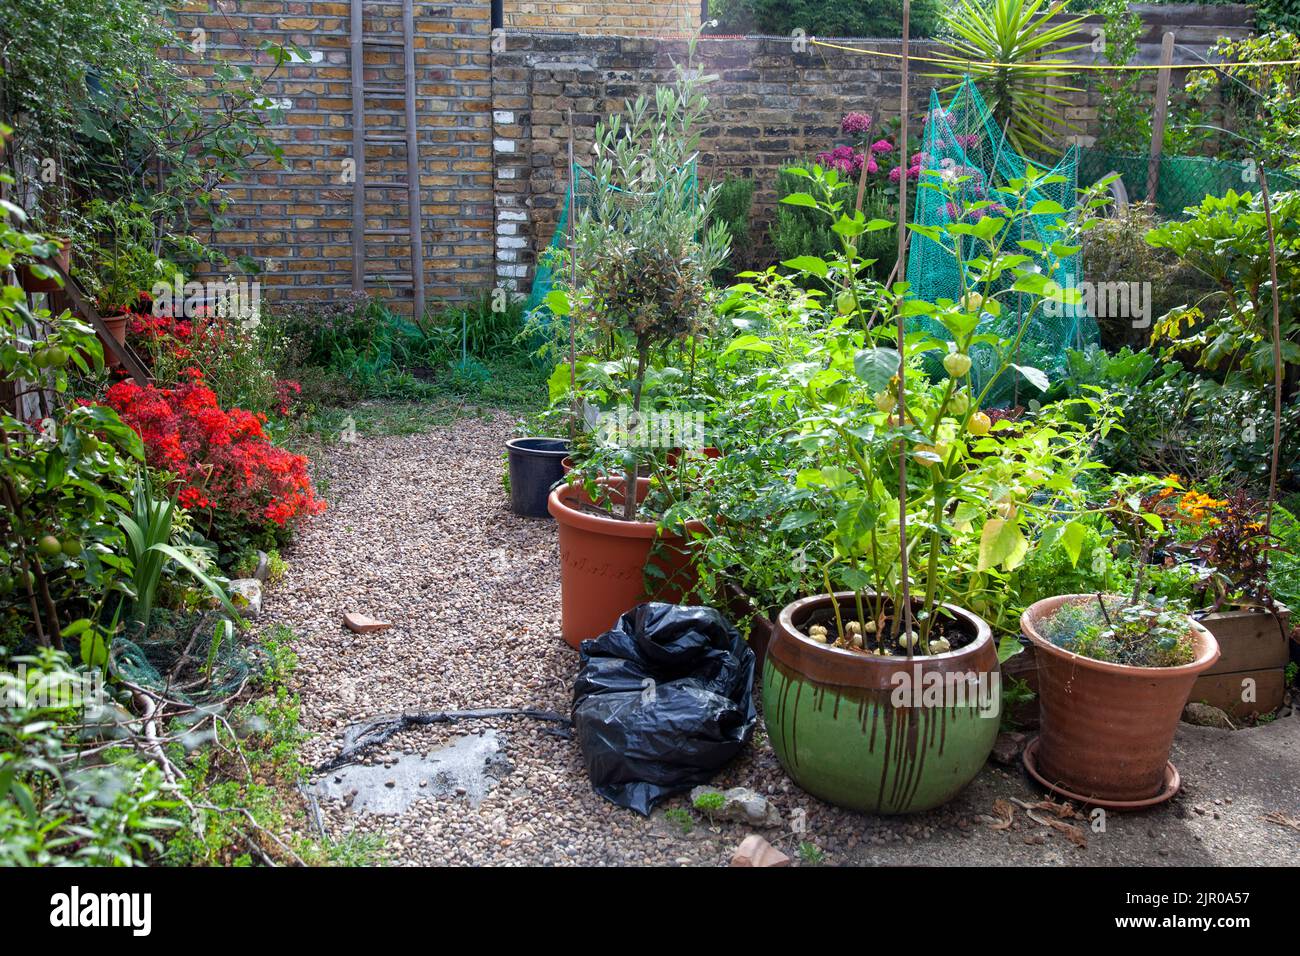 Working Home Garden with Plants, Vegetables - London UK Stock Photo